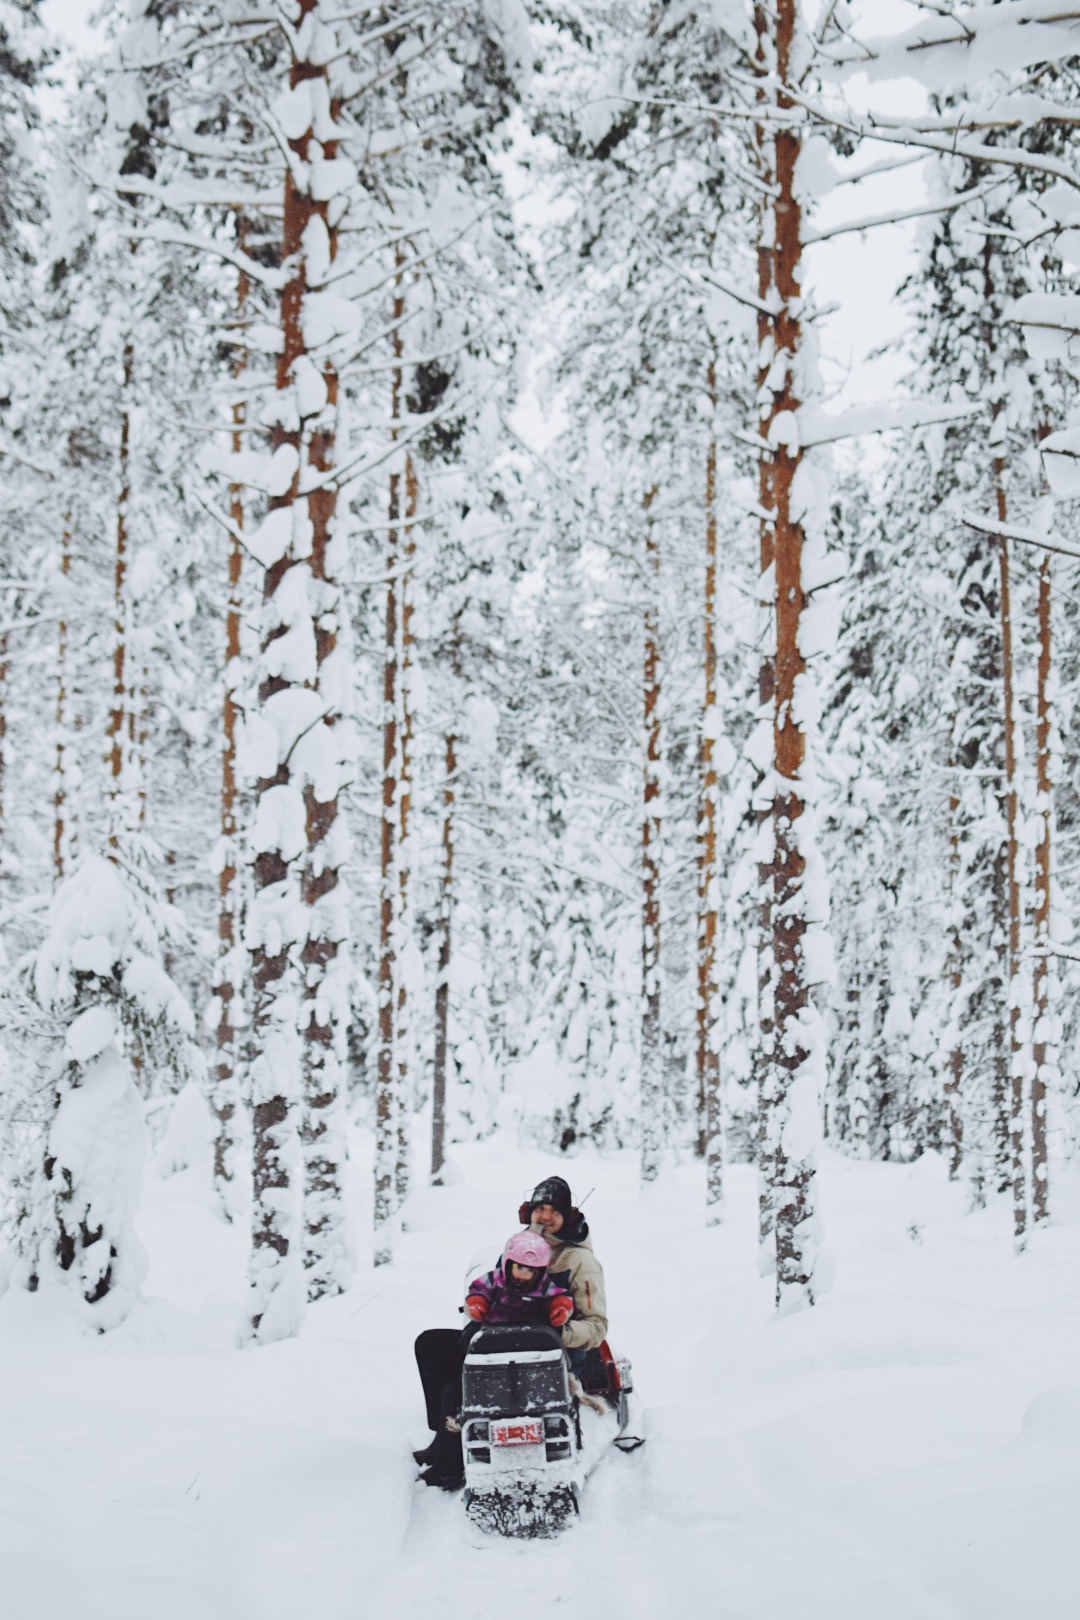 Fredrik is sitting on a snowmobile together with their daughter Lo. The snow lays thick both on the ground and the tree branches.